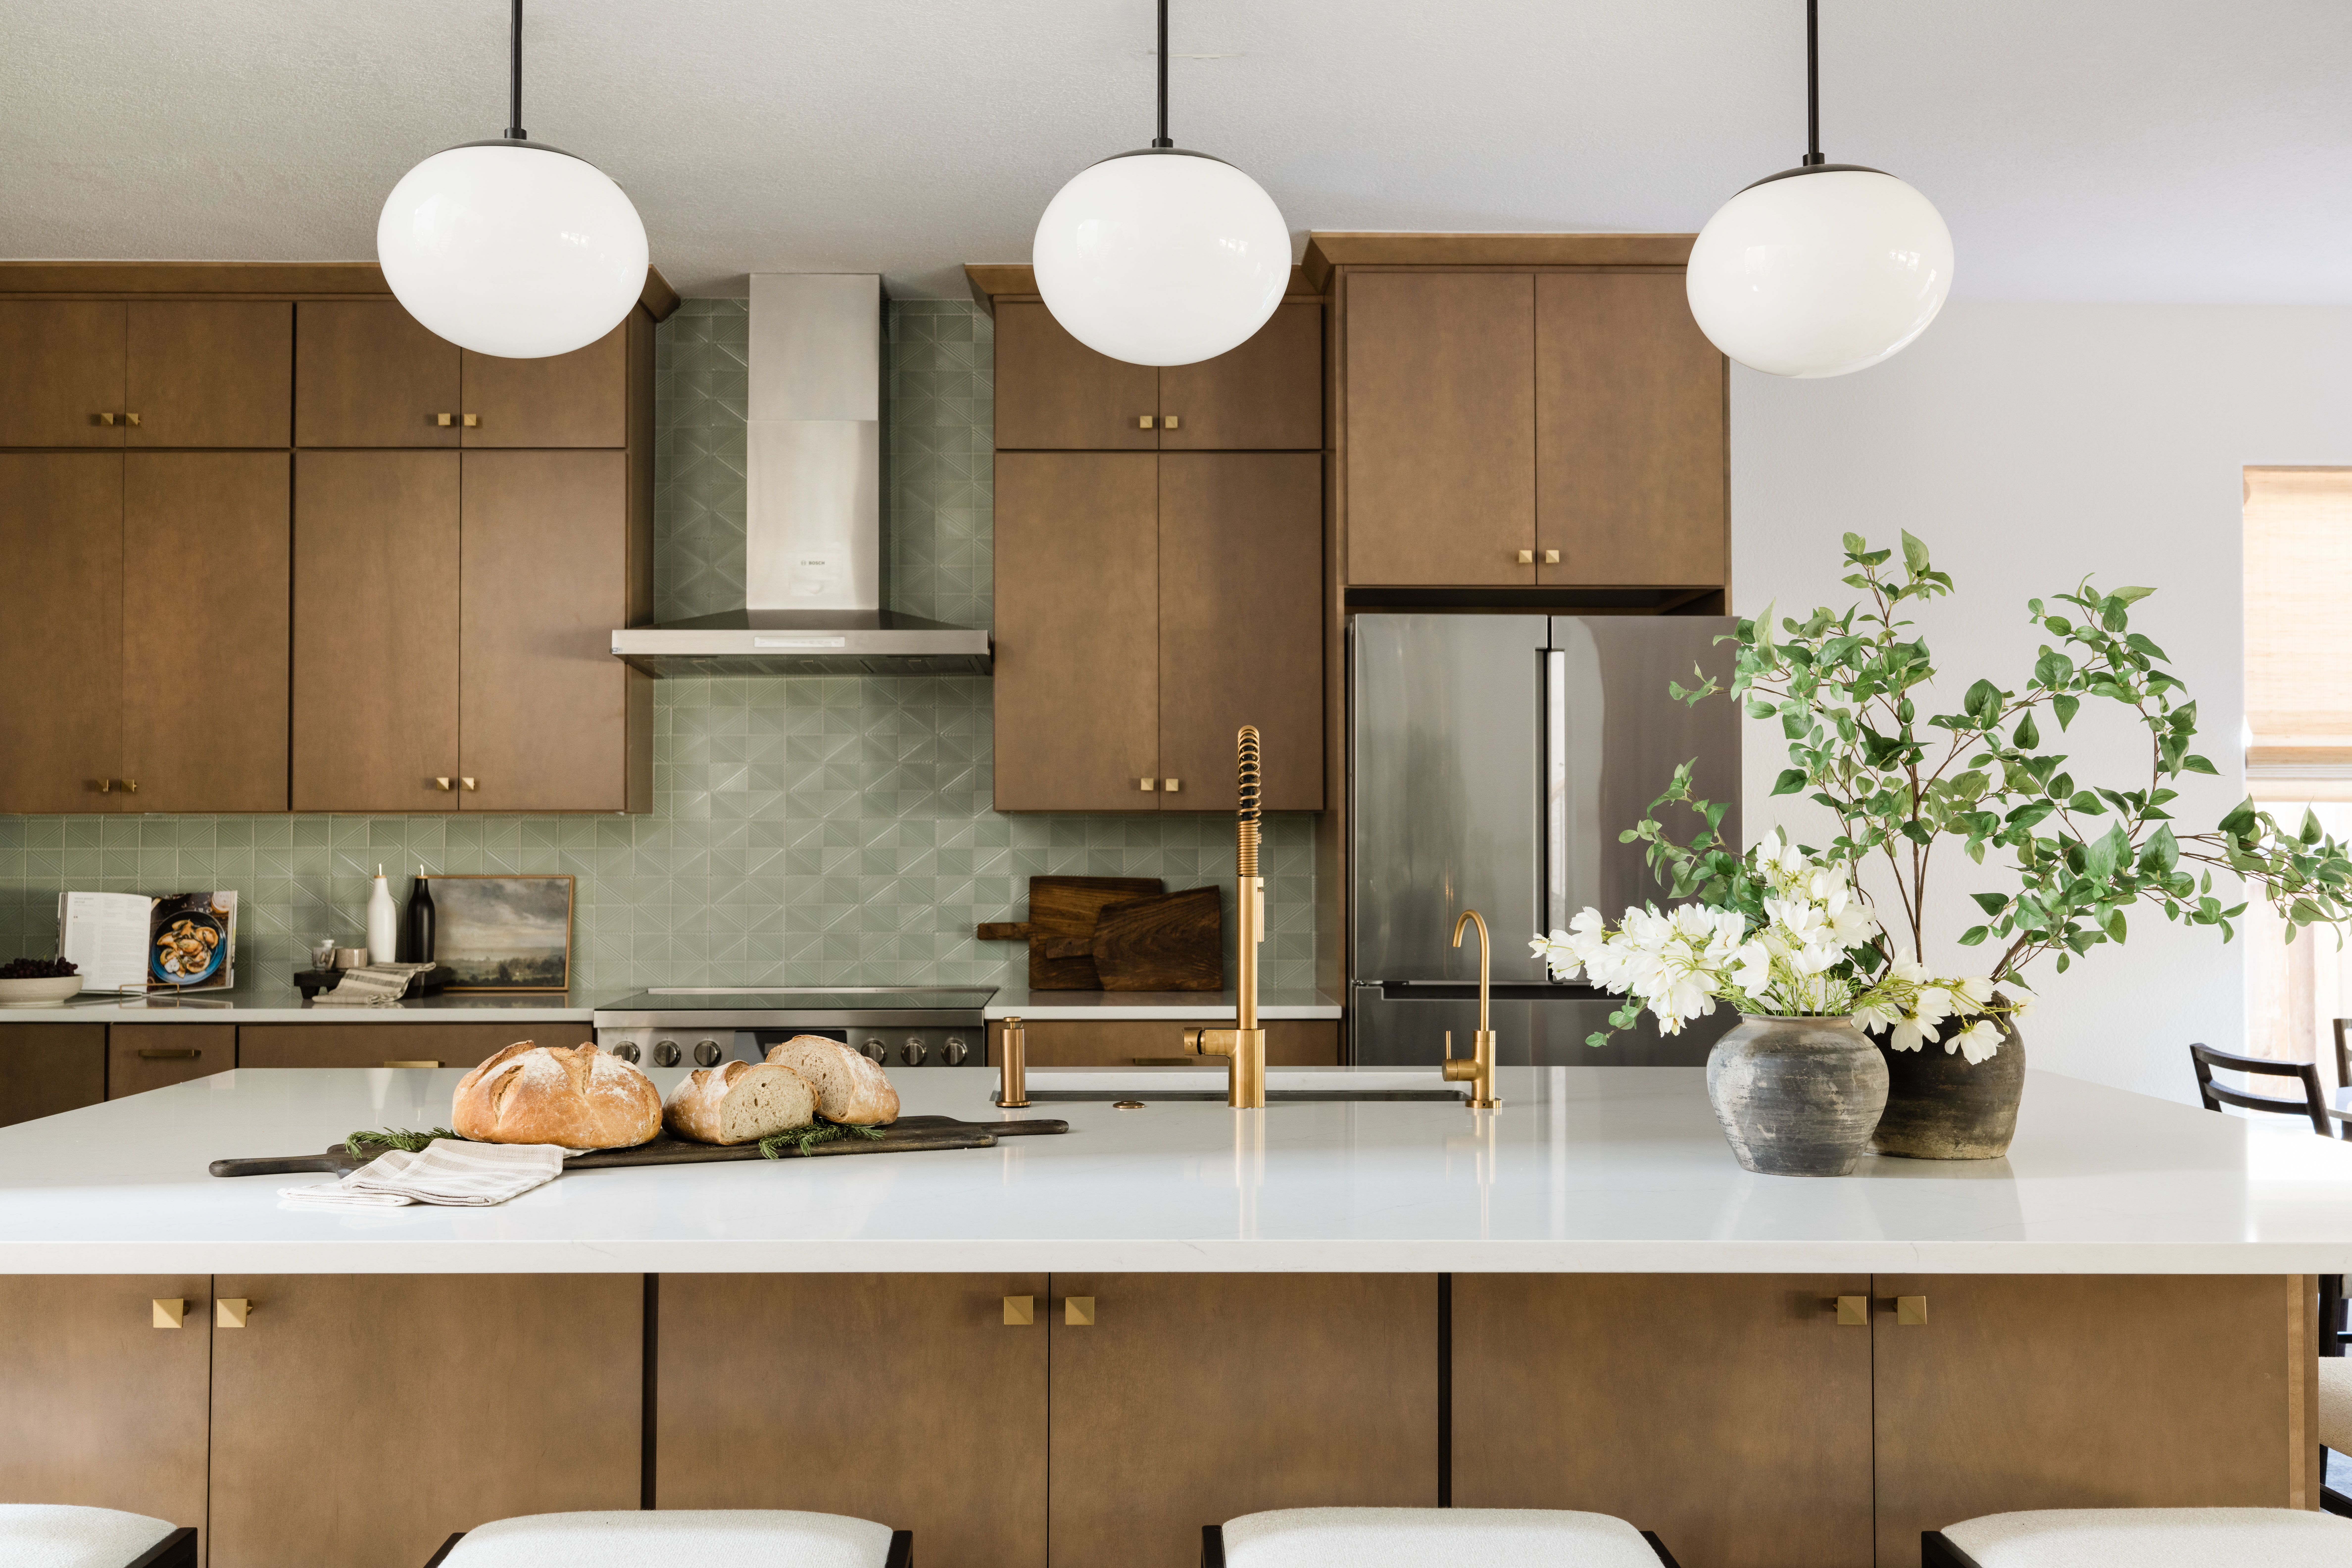 An image of a kitchen, zoomed in on the kitchen island, centered in the room. The kitchen has white counter tops, natural wood colored cabinets, and a sage green tiled backsplash. Three globe pendant light hang over the kitchen island. Vases with flowers and greenery are displayed on top of the island on the right side with a wooden board with loaves of artisan breads on the left. 